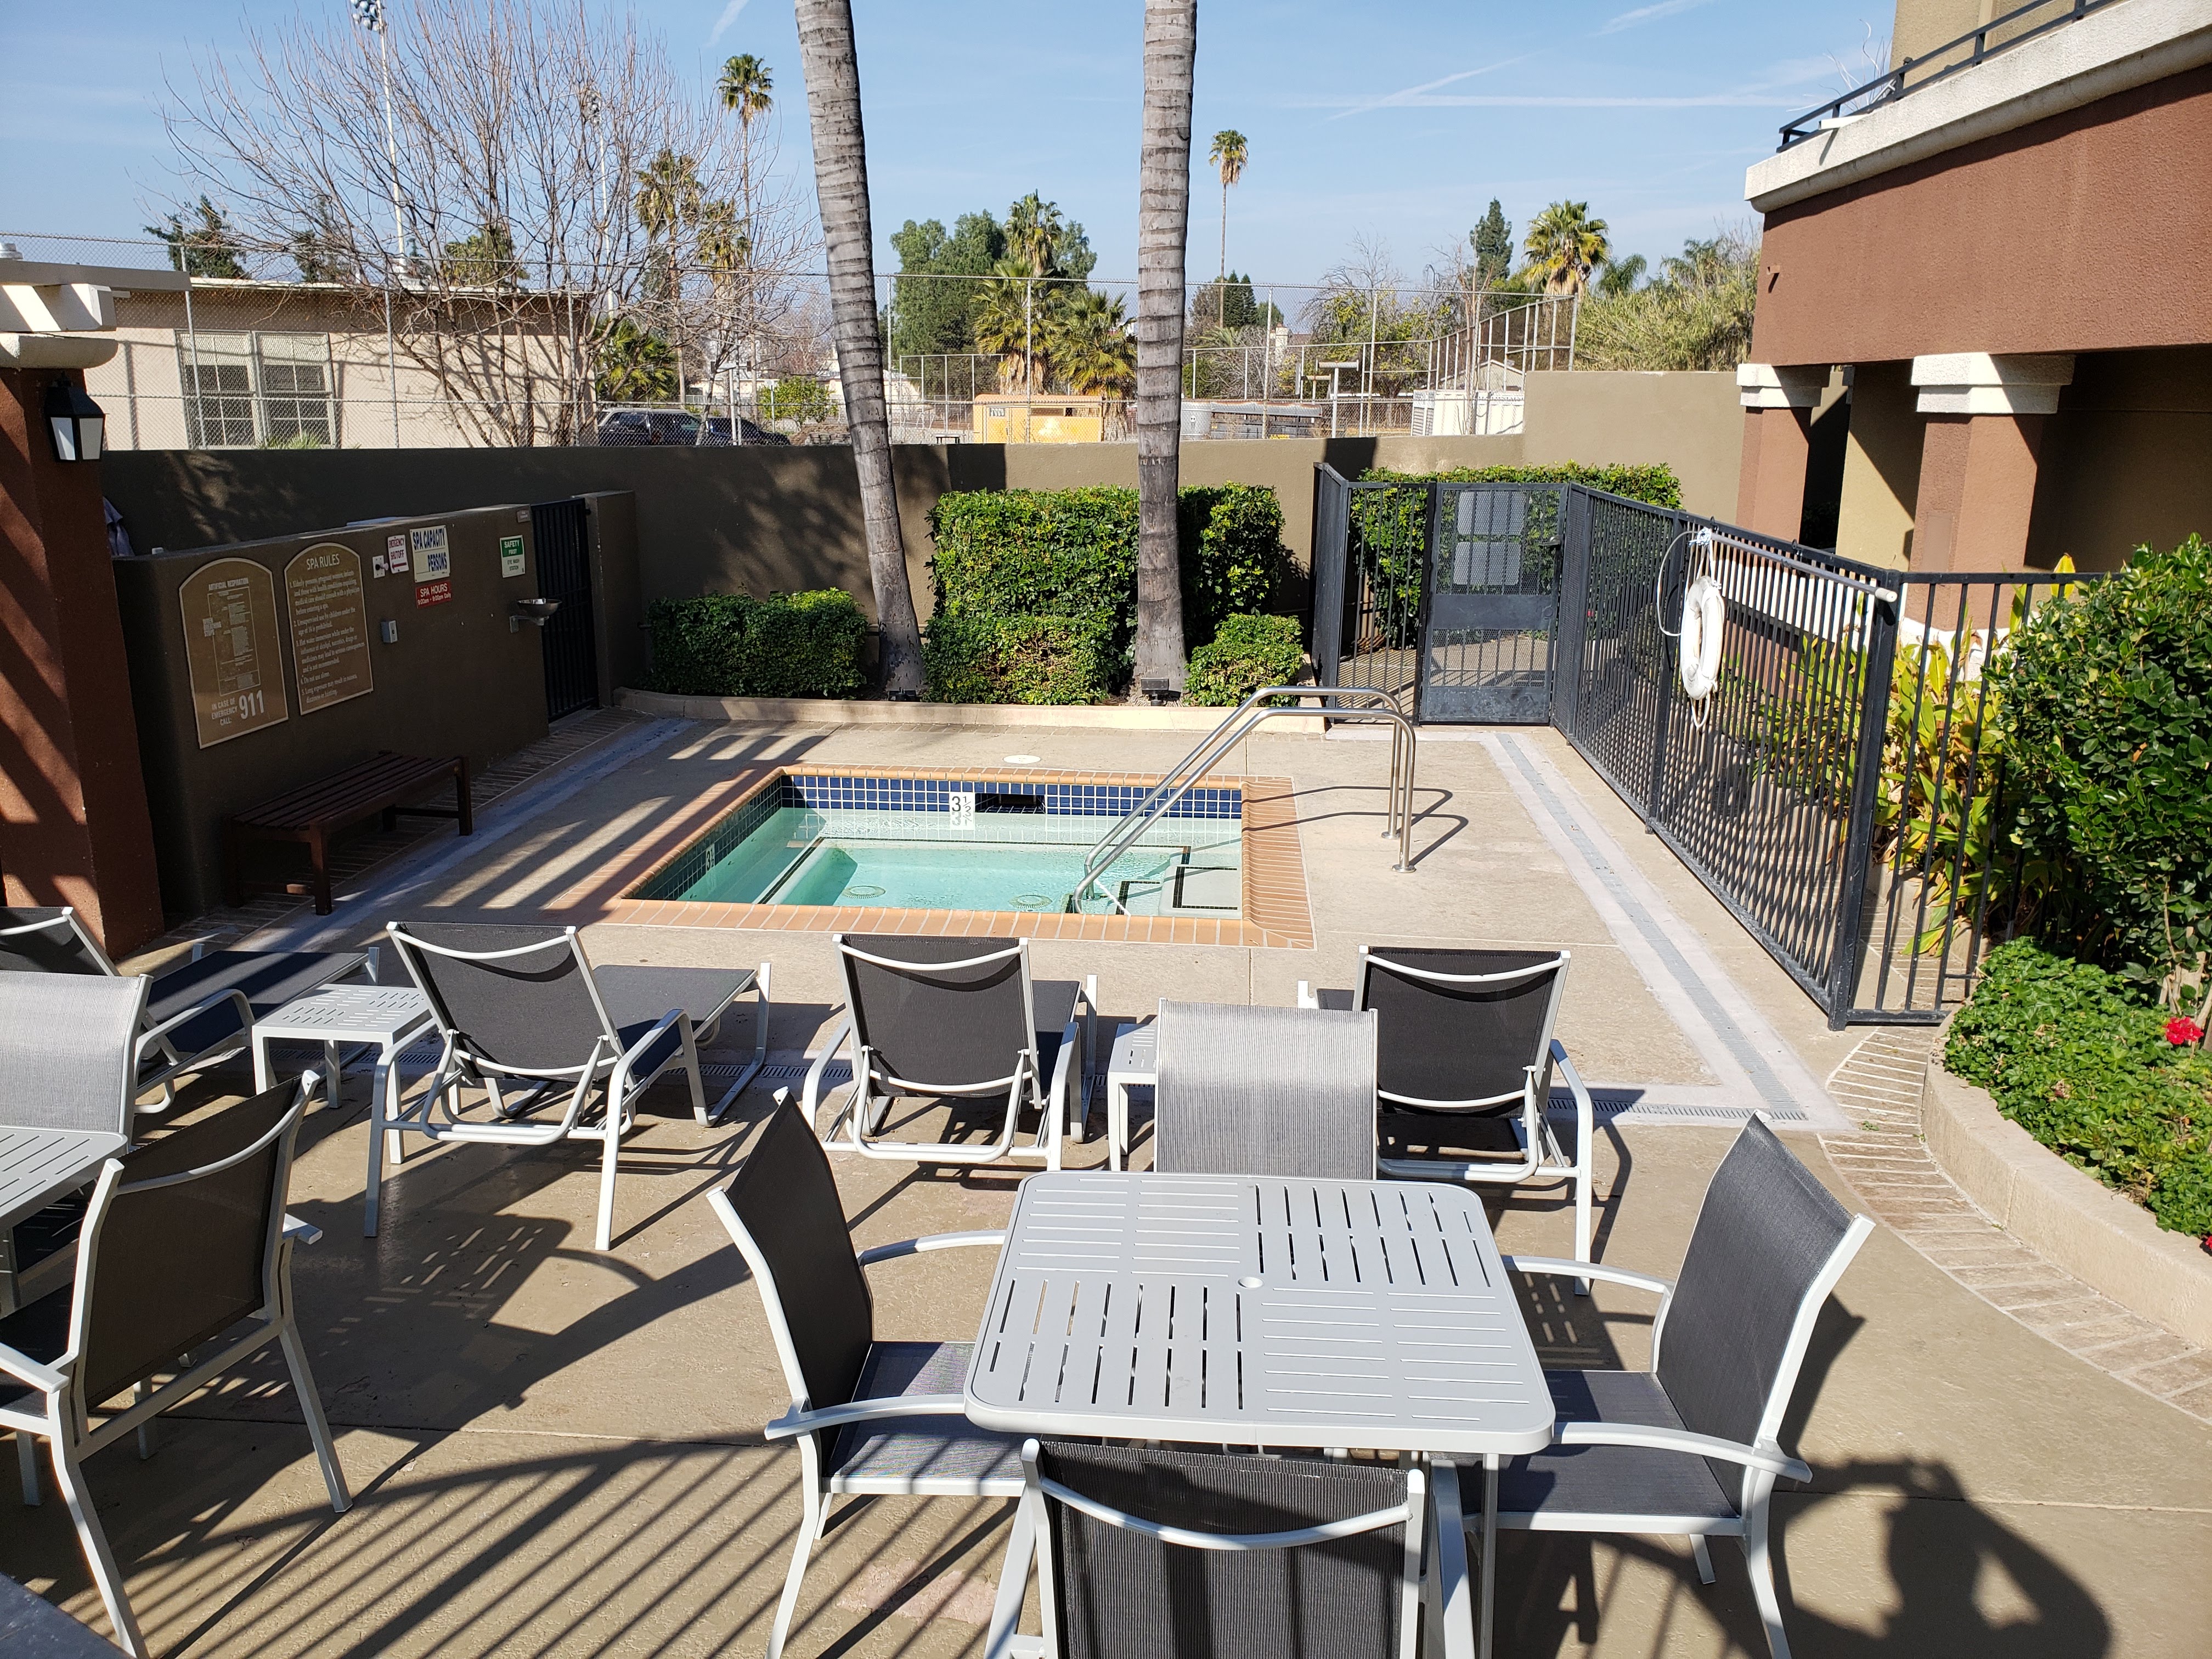 Image of vintage crossing senior apartments outdoor spa area. Are is fenced off. spa located near bushes and palm trees. Pool shairs next to spa.